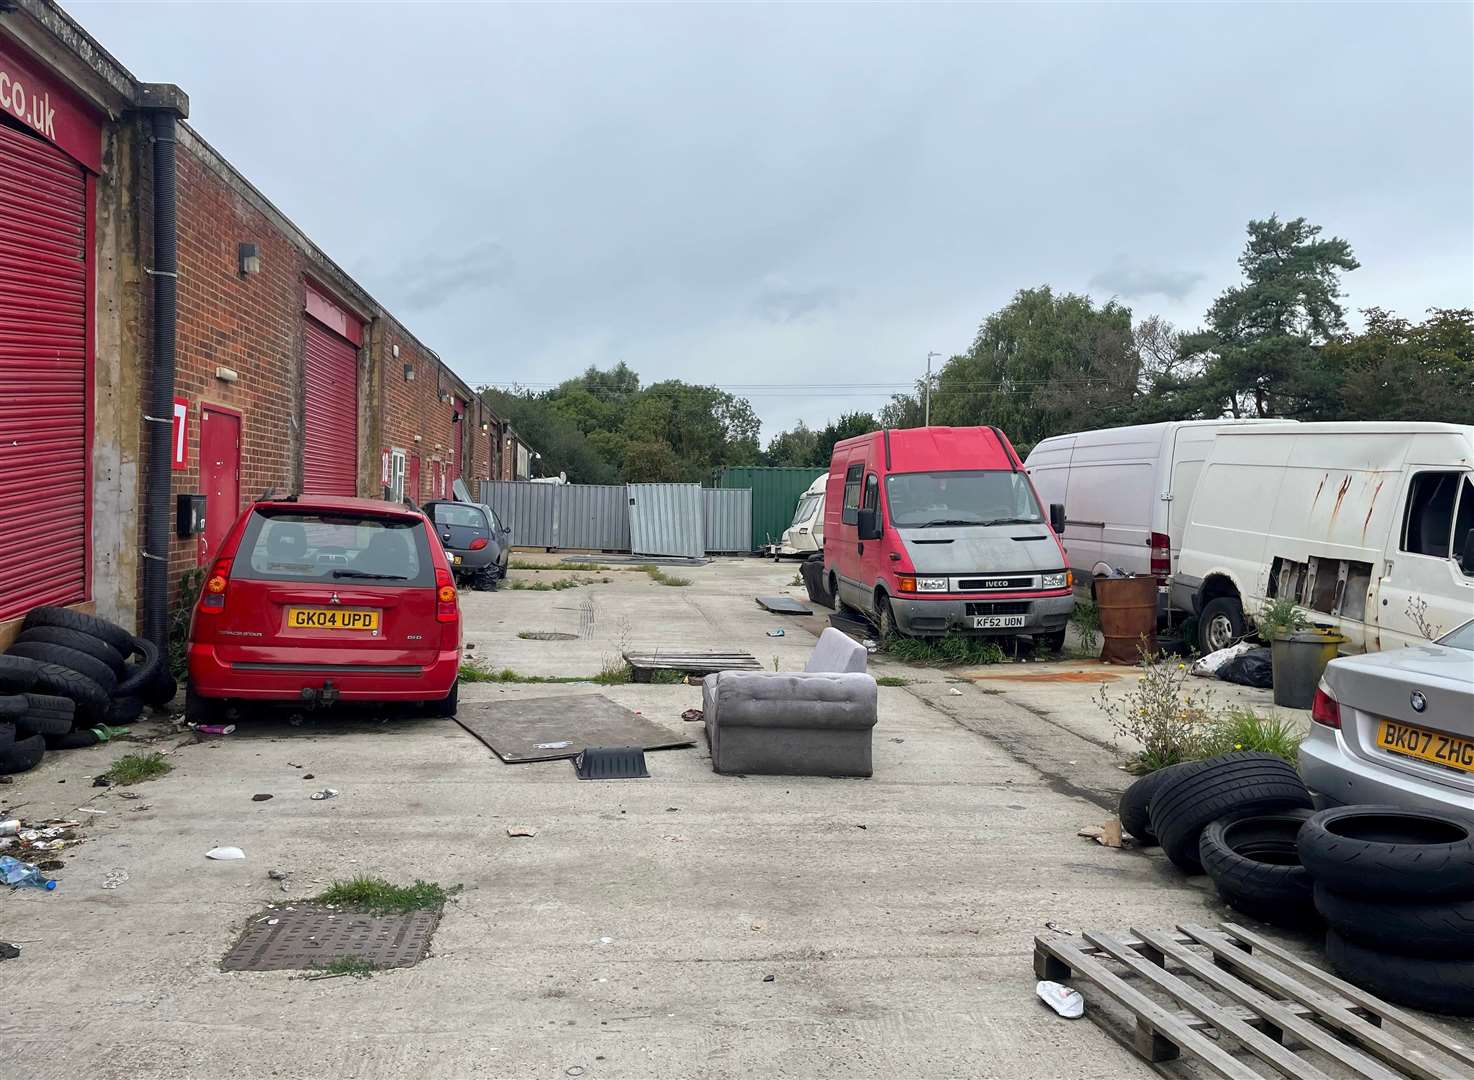 Abandoned cars and rubbish are strewn around the site